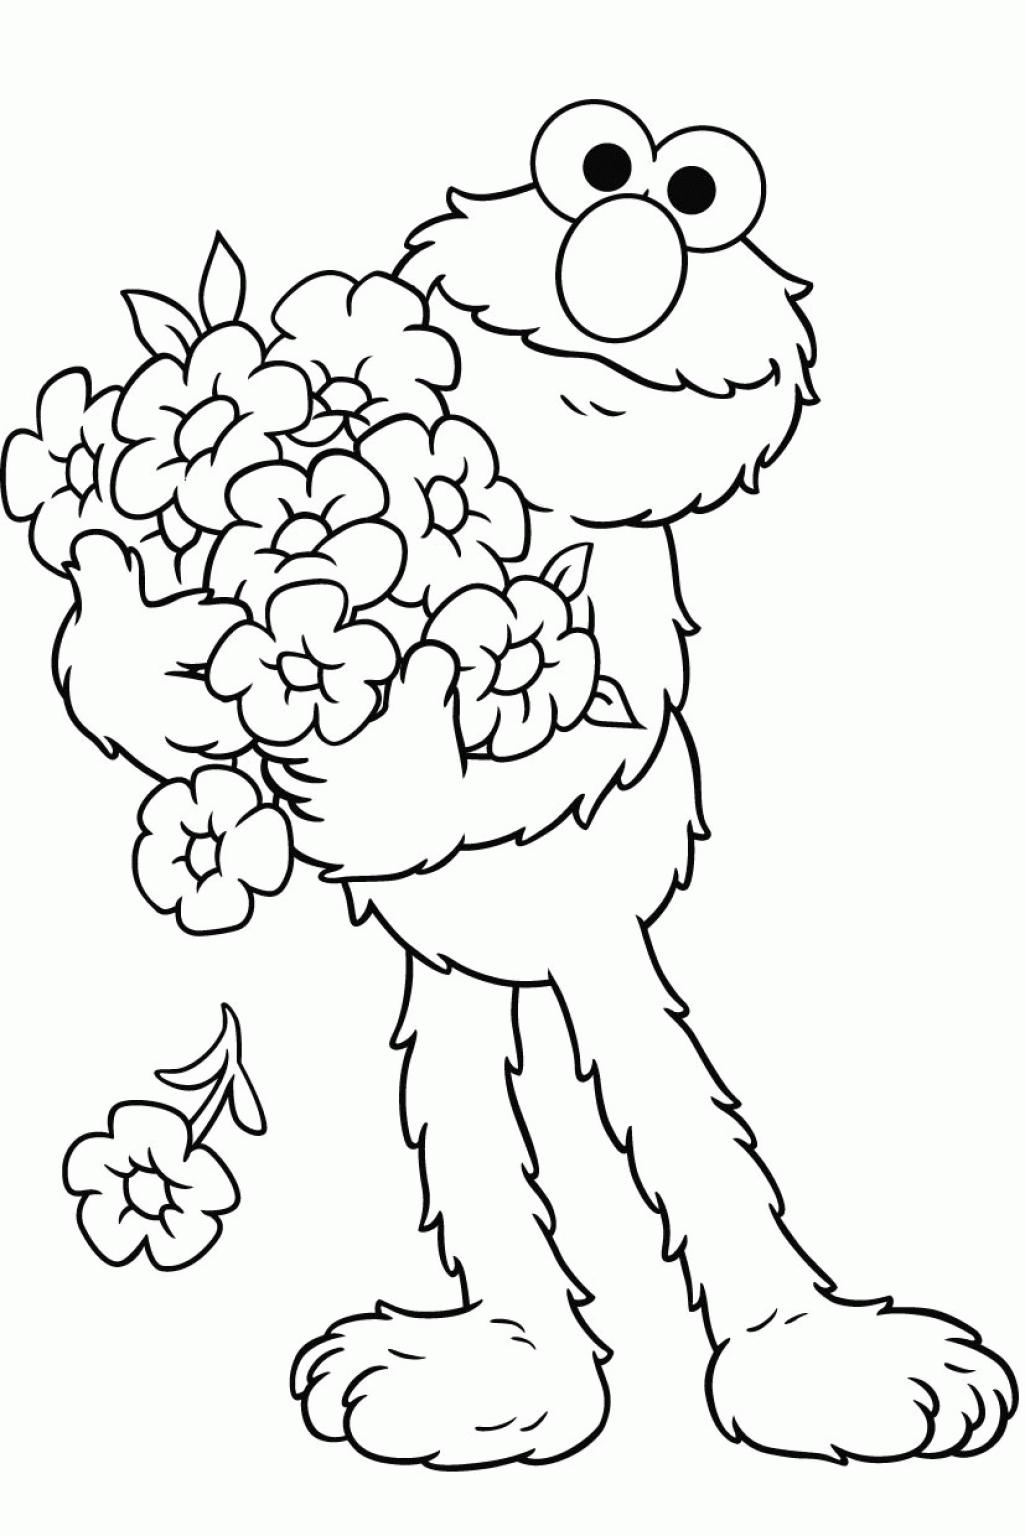 Elmo Coloring Pages For Toddlers Funny Coloring Page Coloring ...